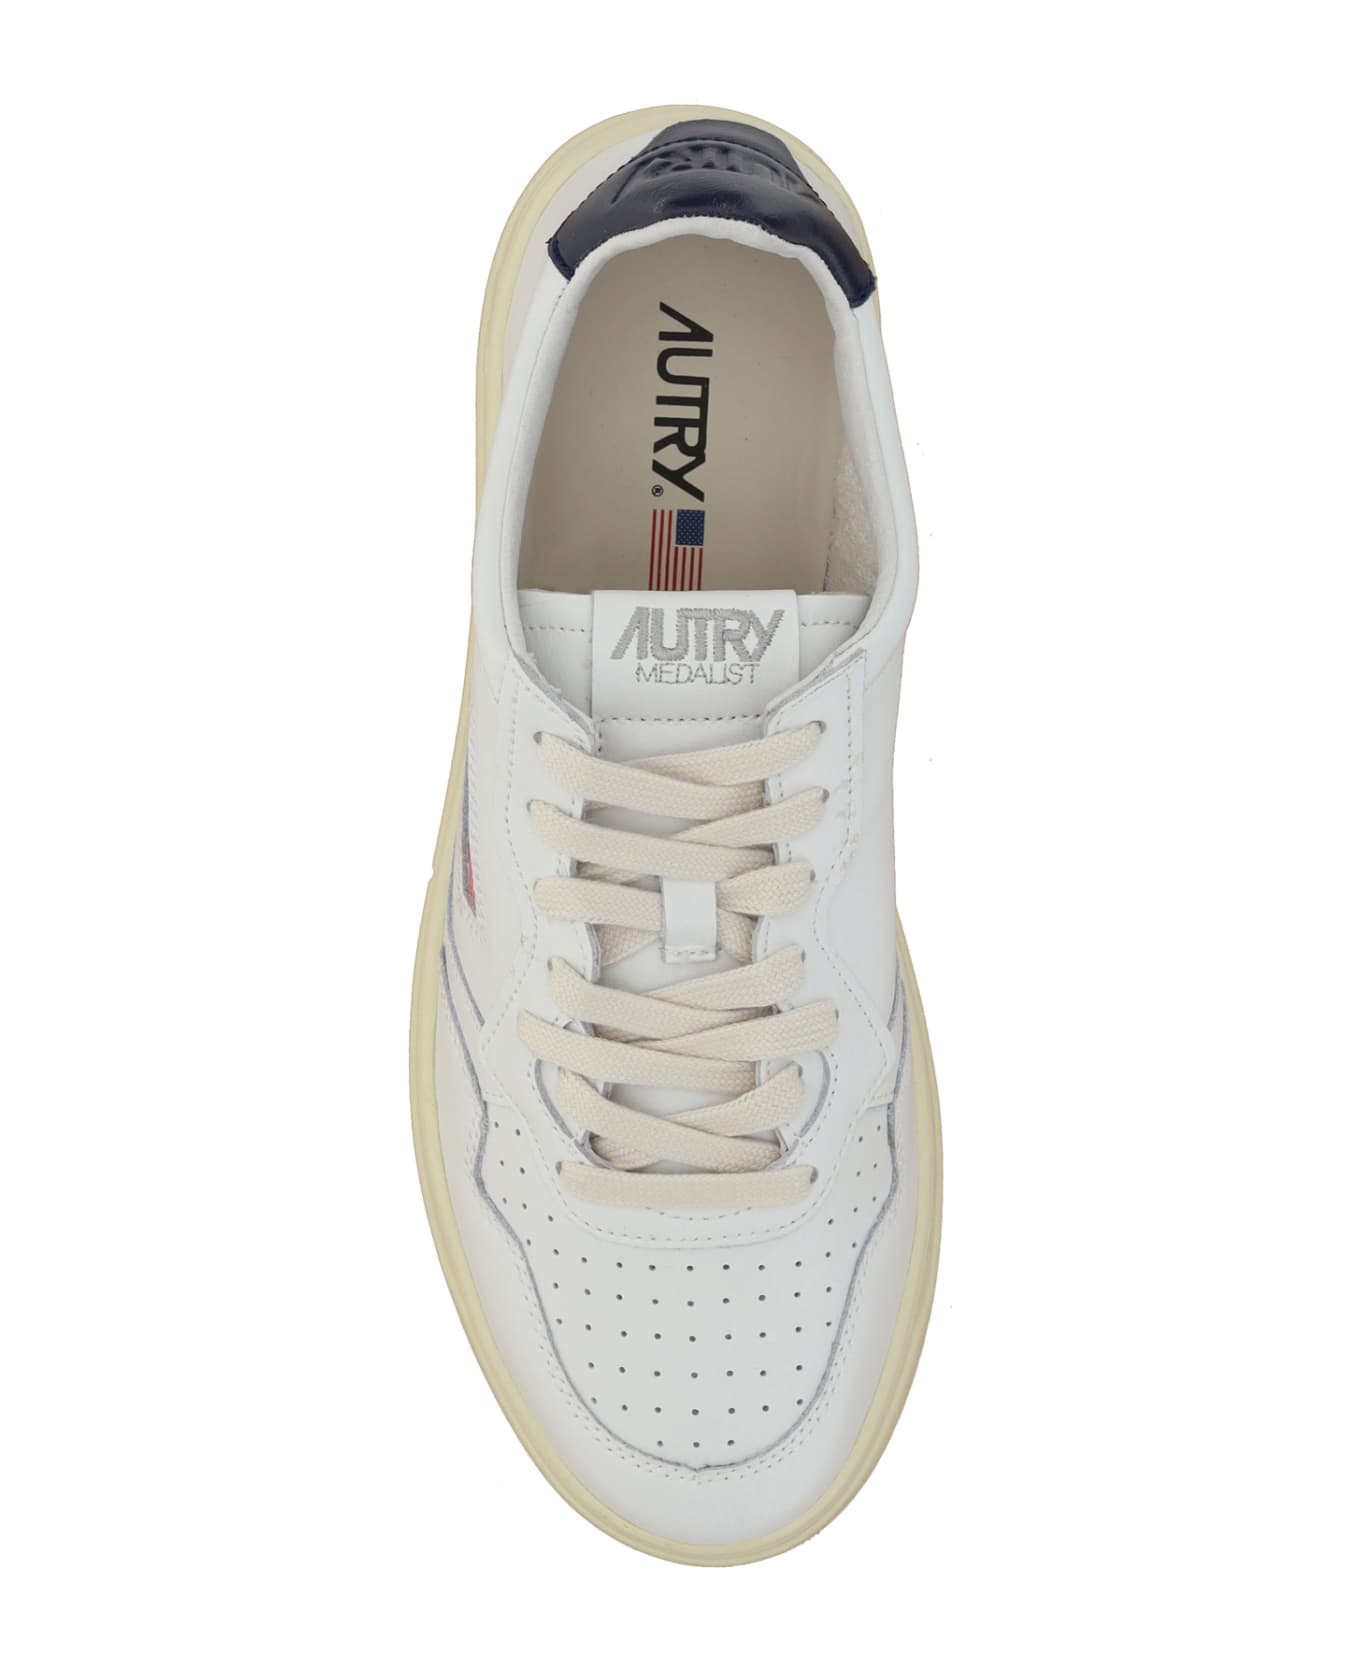 Autry 01 Low Sneakers - WHT/SPACE スニーカー